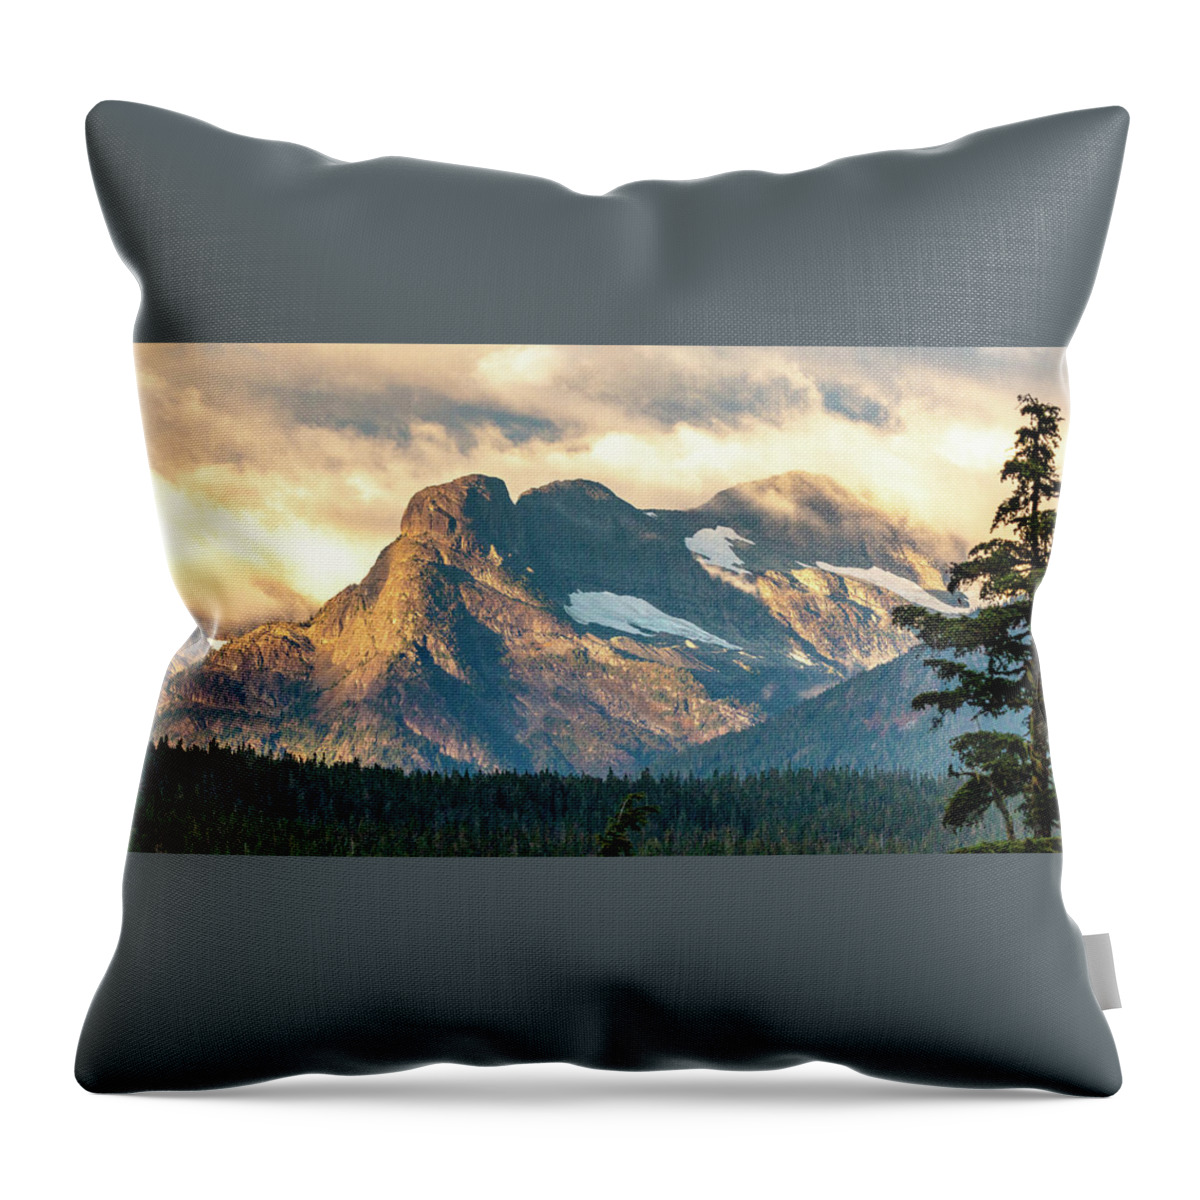 Landscapes Throw Pillow featuring the photograph Beaufort Range by Claude Dalley